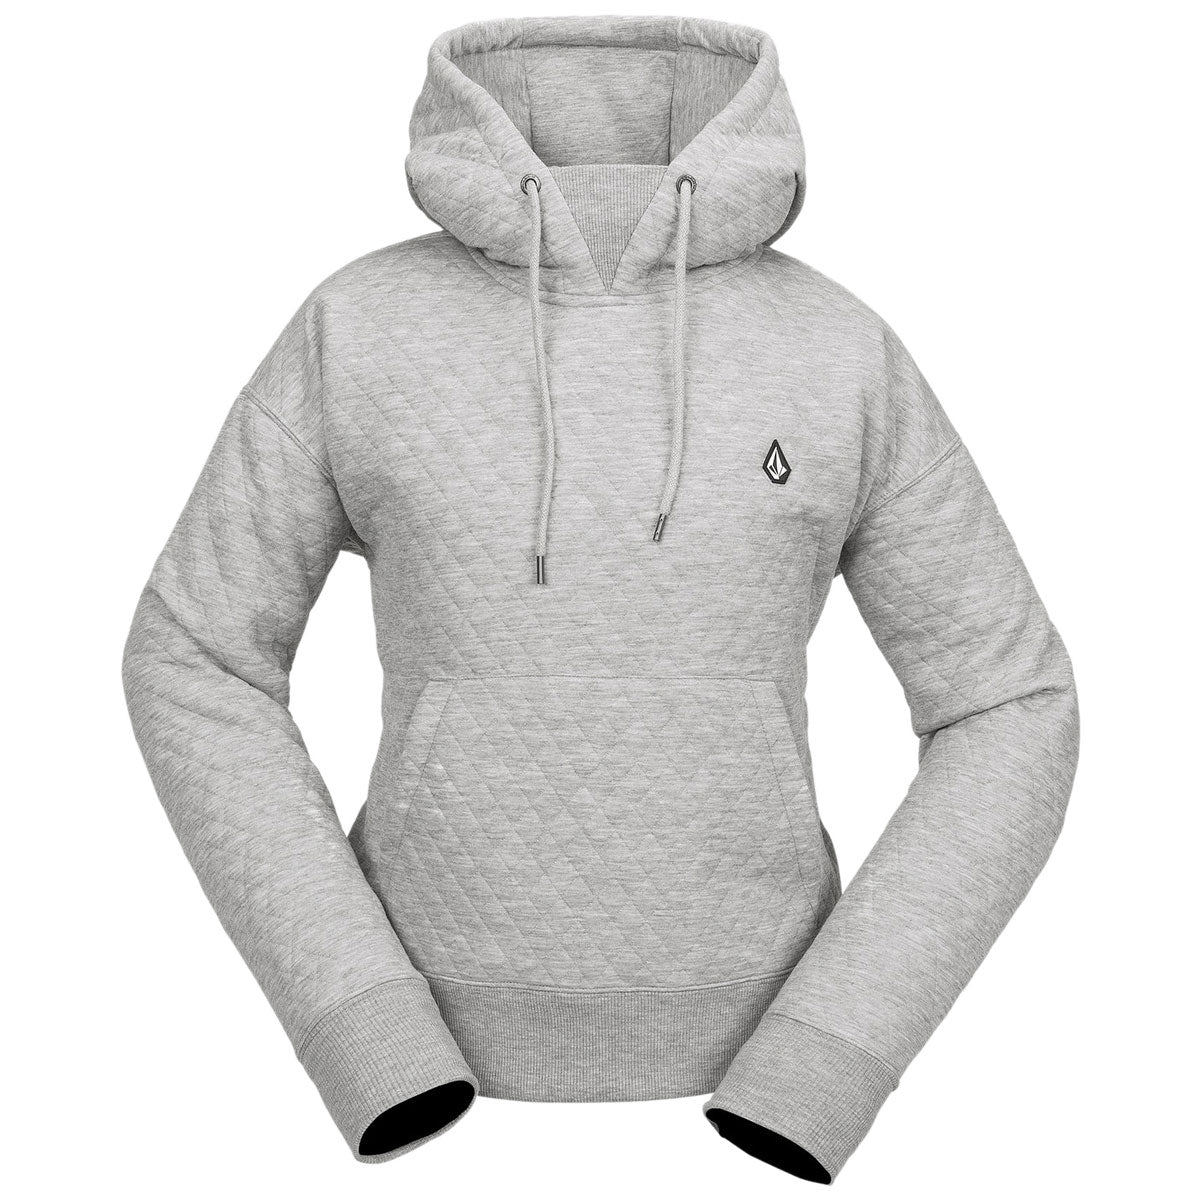 Volcom Womens V.co Air Layer Thermal Hoodie - Heather Grey image 1